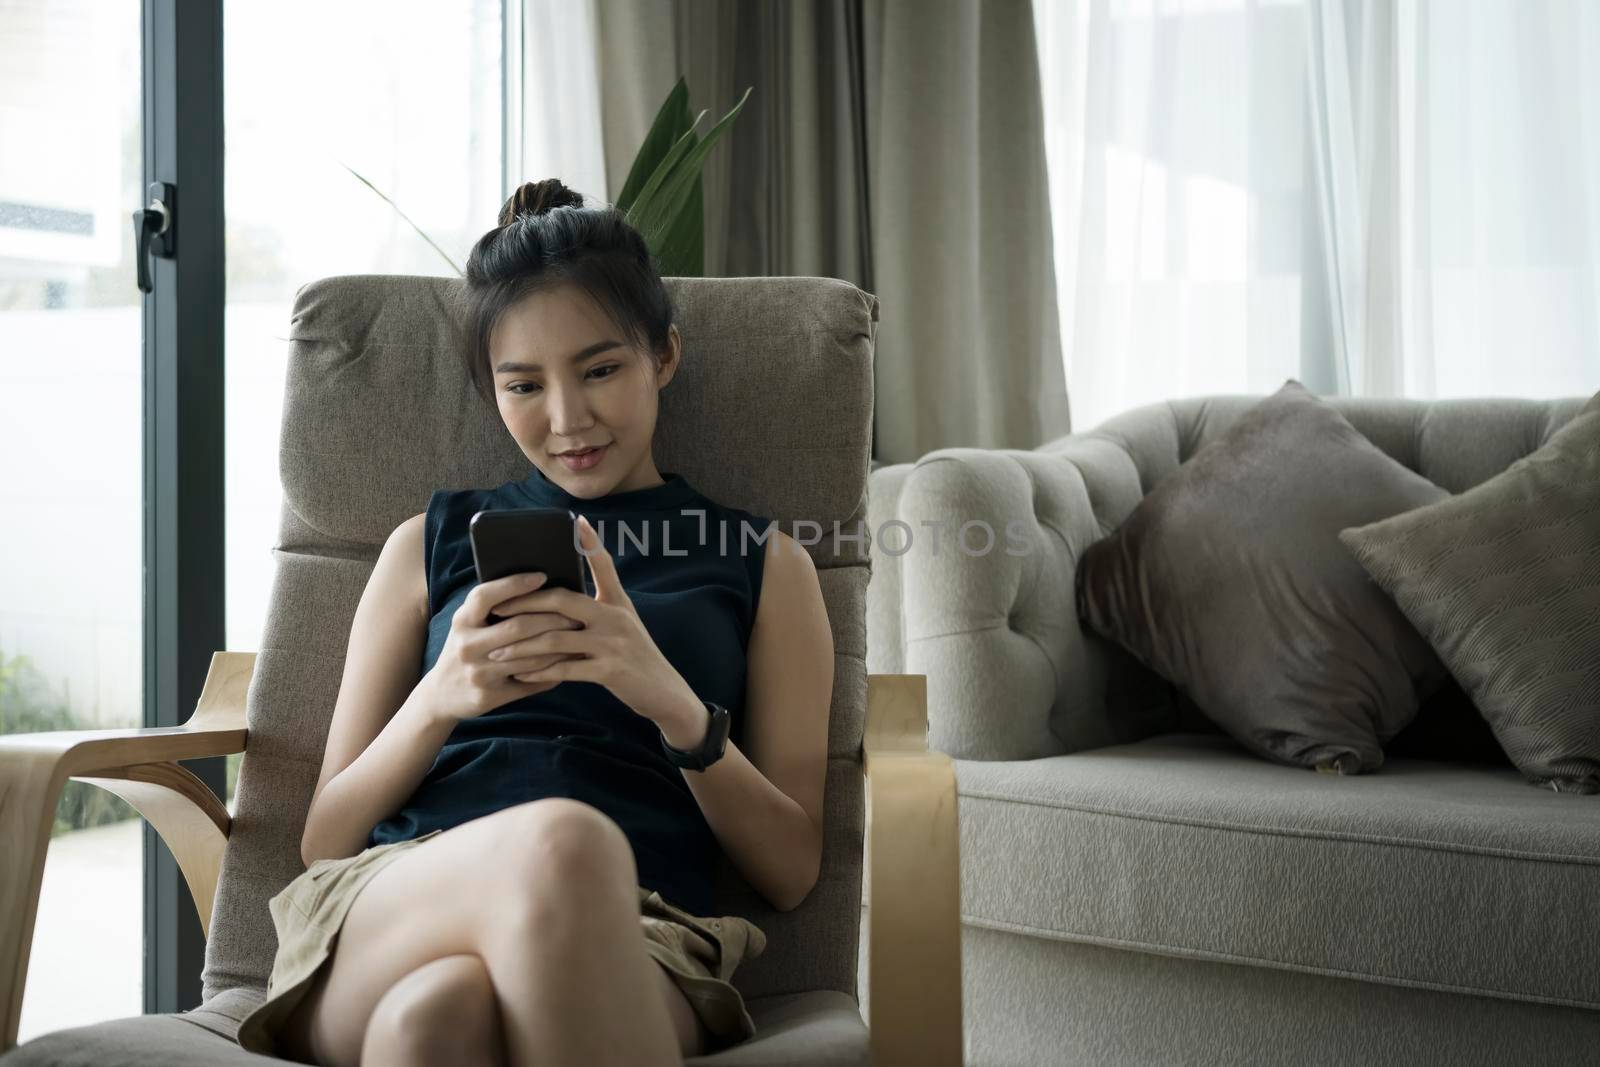 Millennial woman using smart phone while relaxing on armchair.